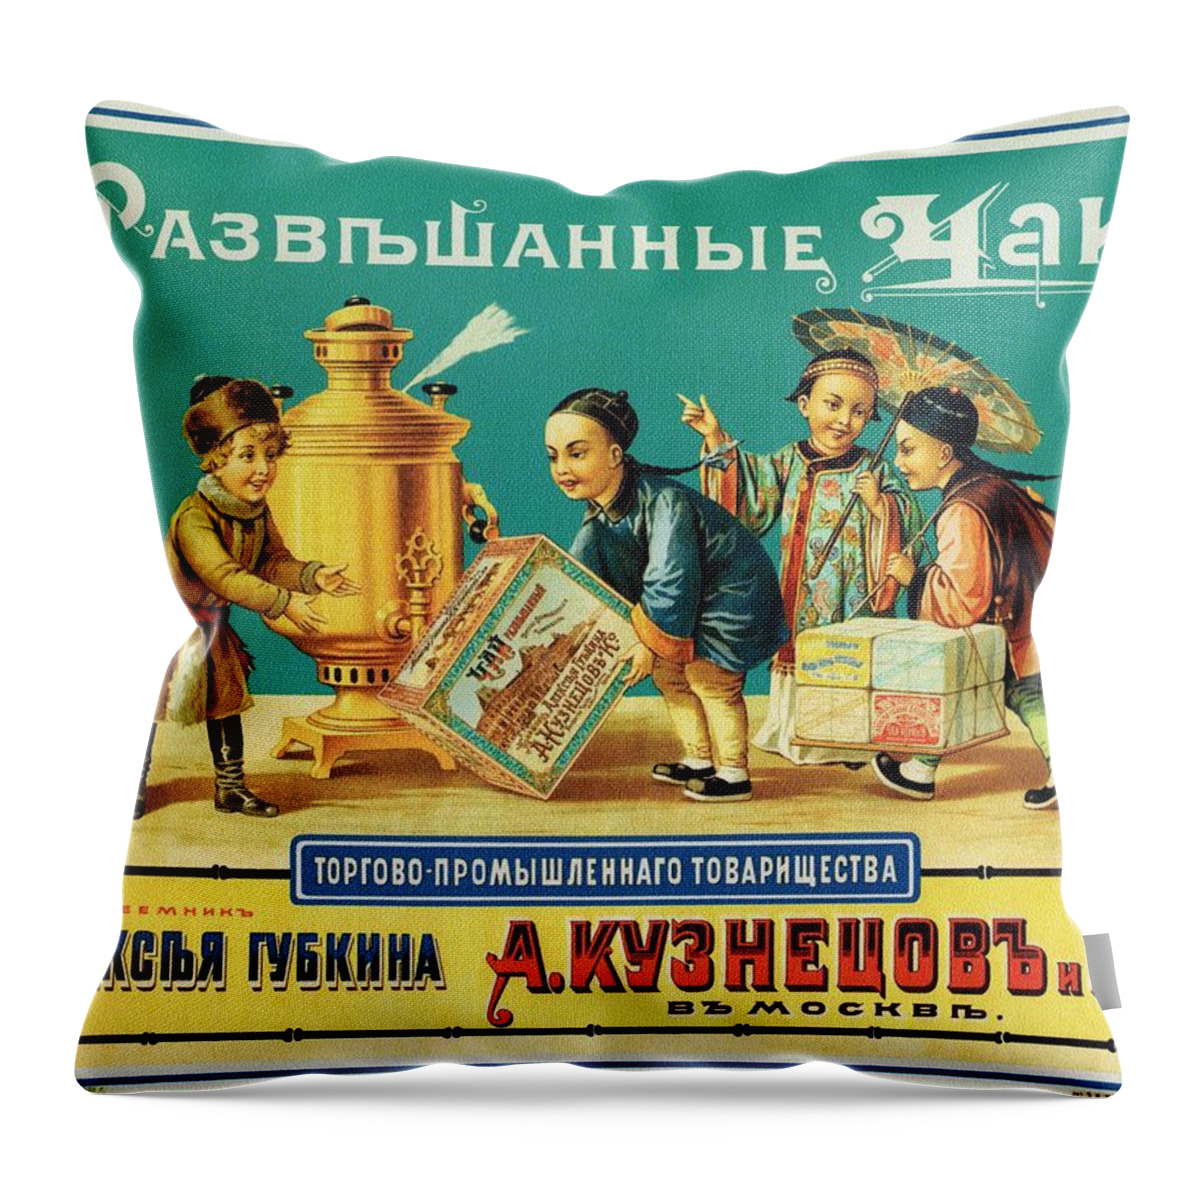 Vintage Throw Pillow featuring the mixed media Kuznezov and Co - Vintage Russian Tea Advertising Poster by Studio Grafiikka